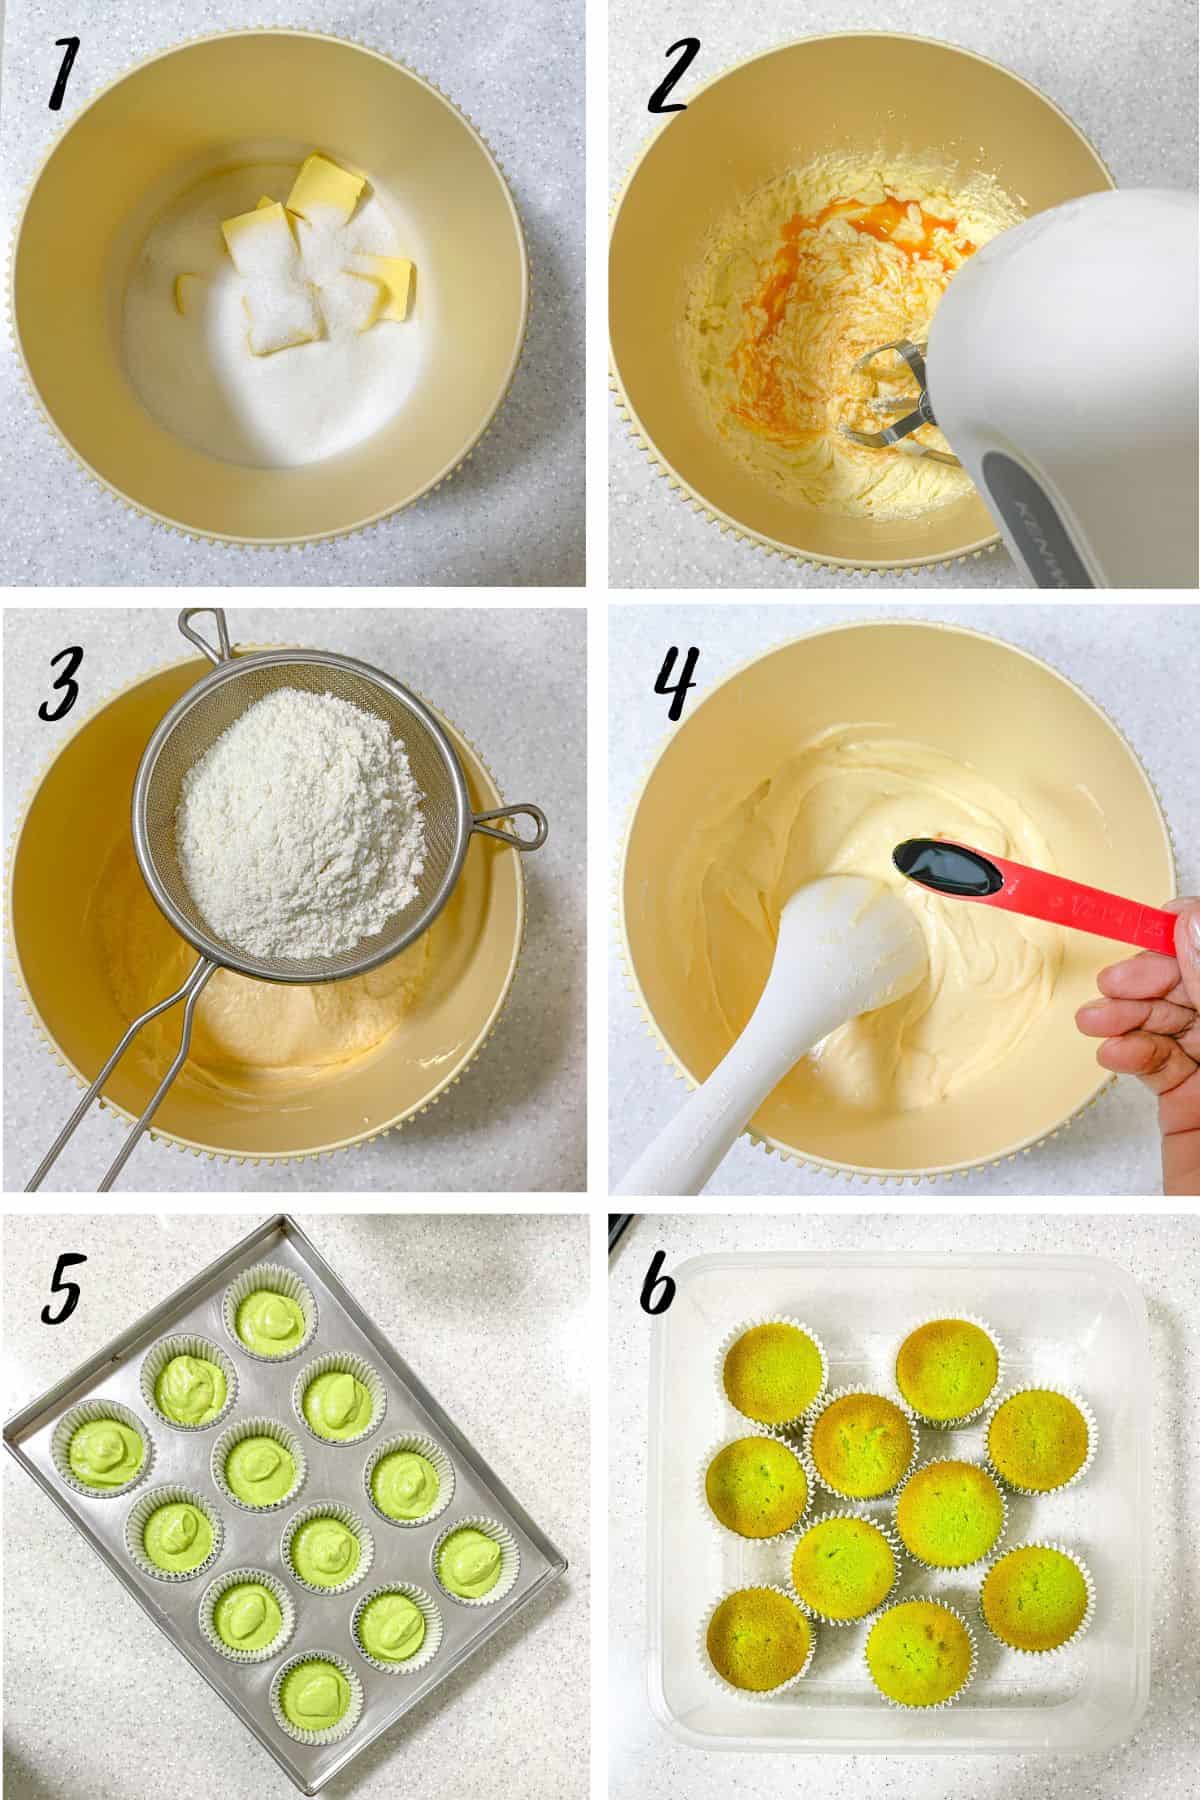 A poster of 6 images showing how to make pandan cupcakes.